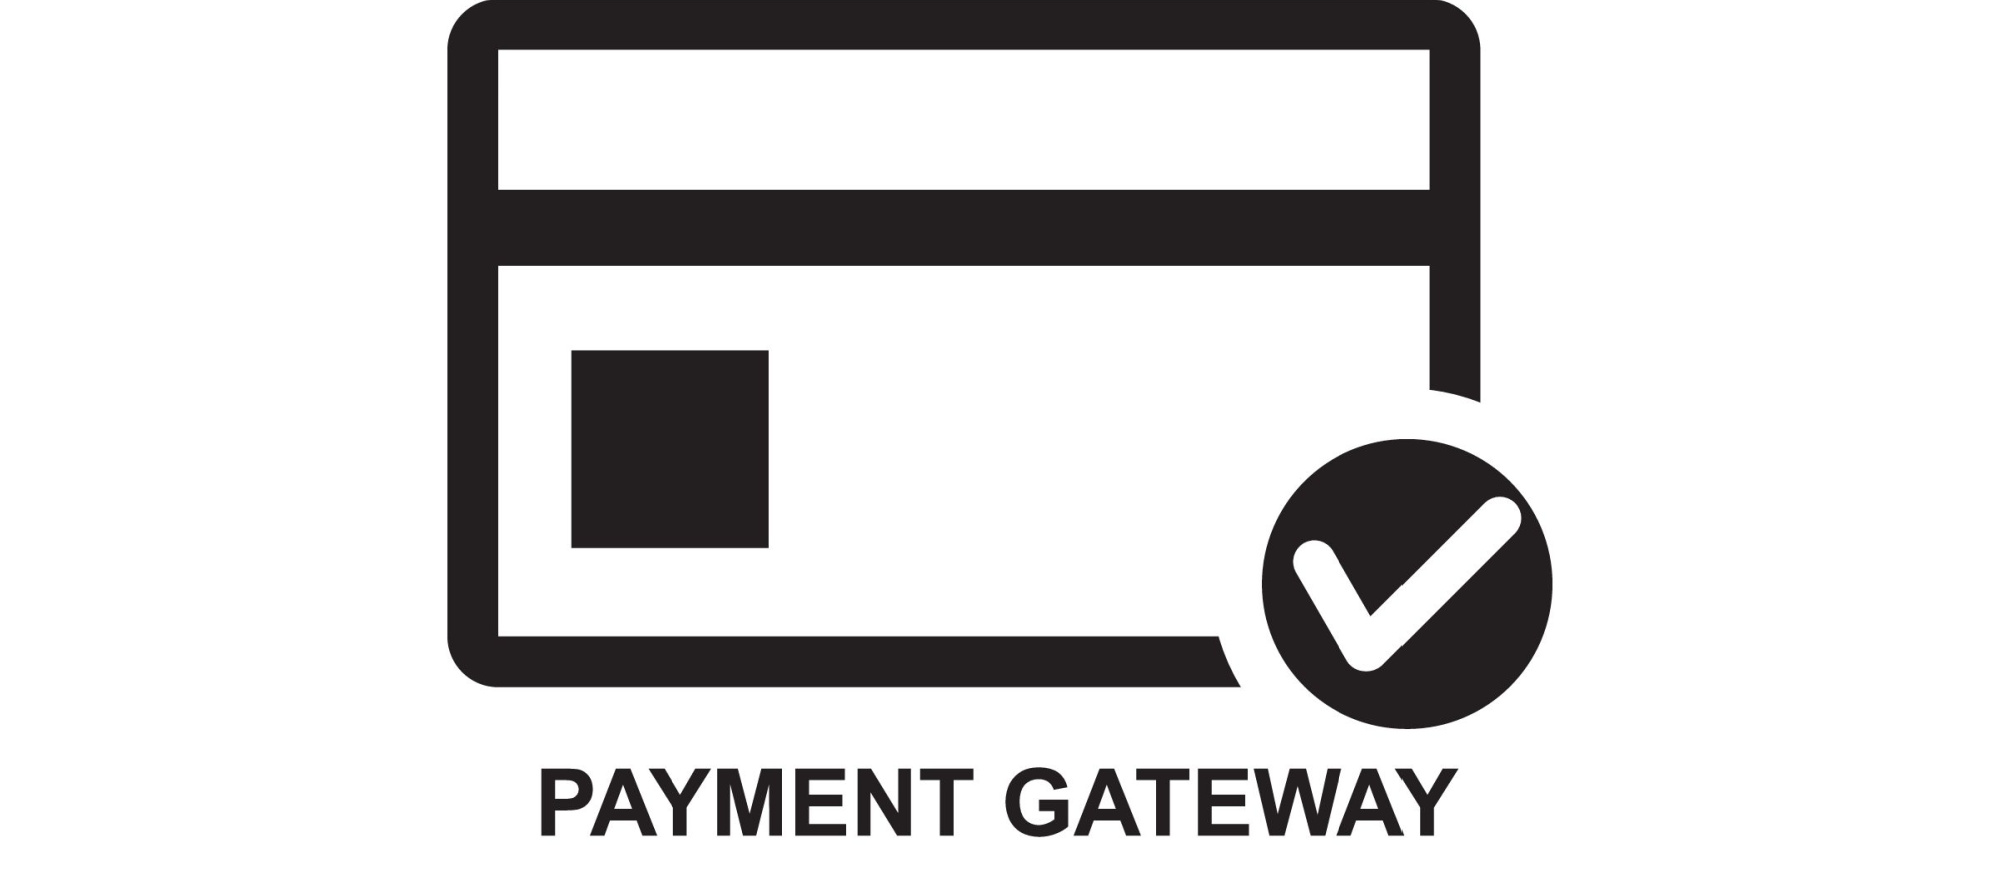 image of payment gateway integration